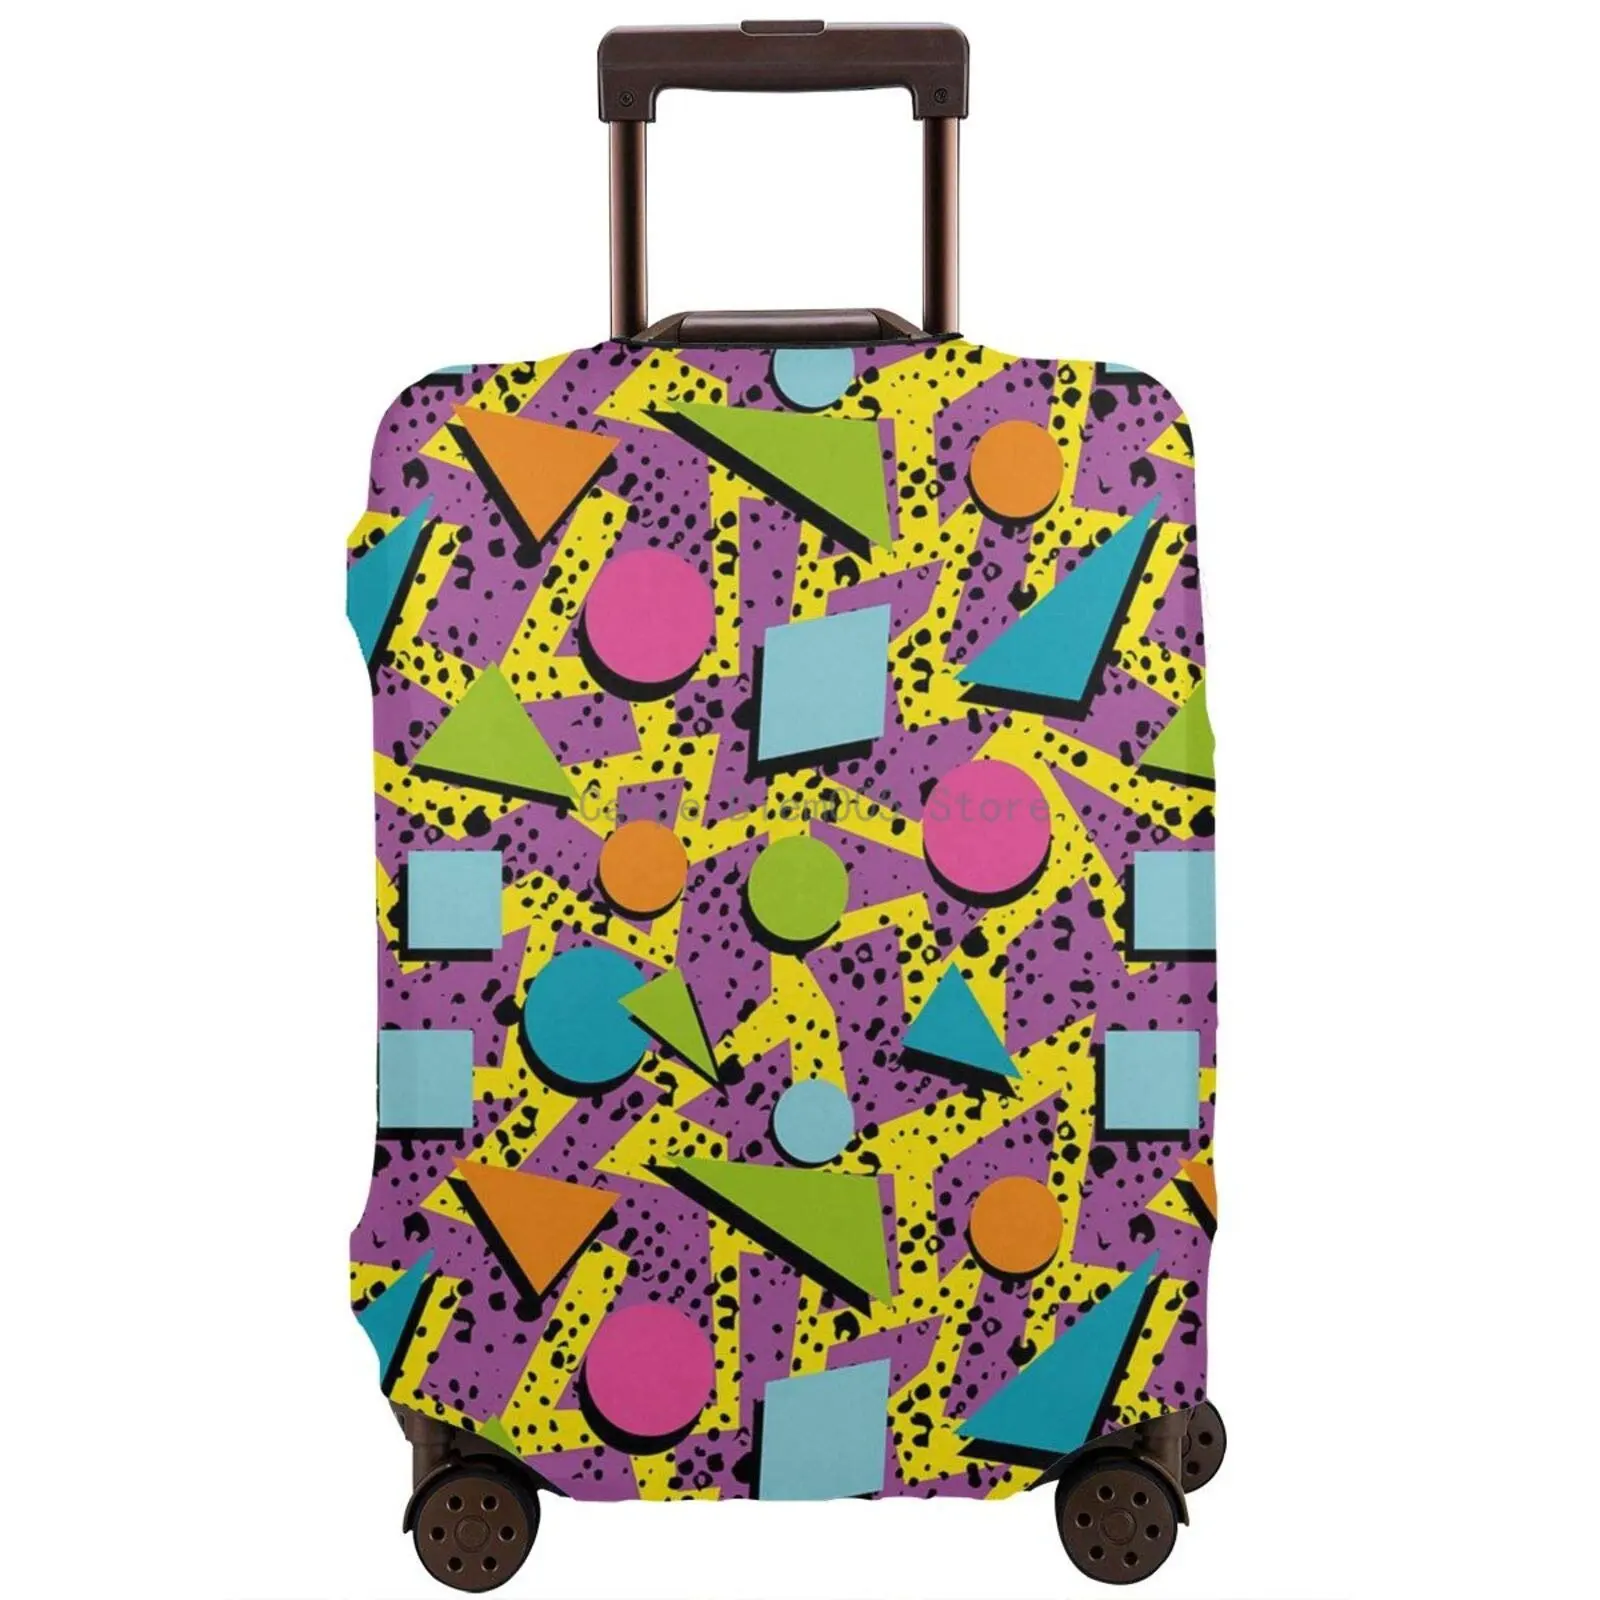 

Colorful Suitcase Cover Anti-Wrinkle Baggage Protective Sleeve Travel Luggage Holiday Luggages Covers Fits 18-32 Inch